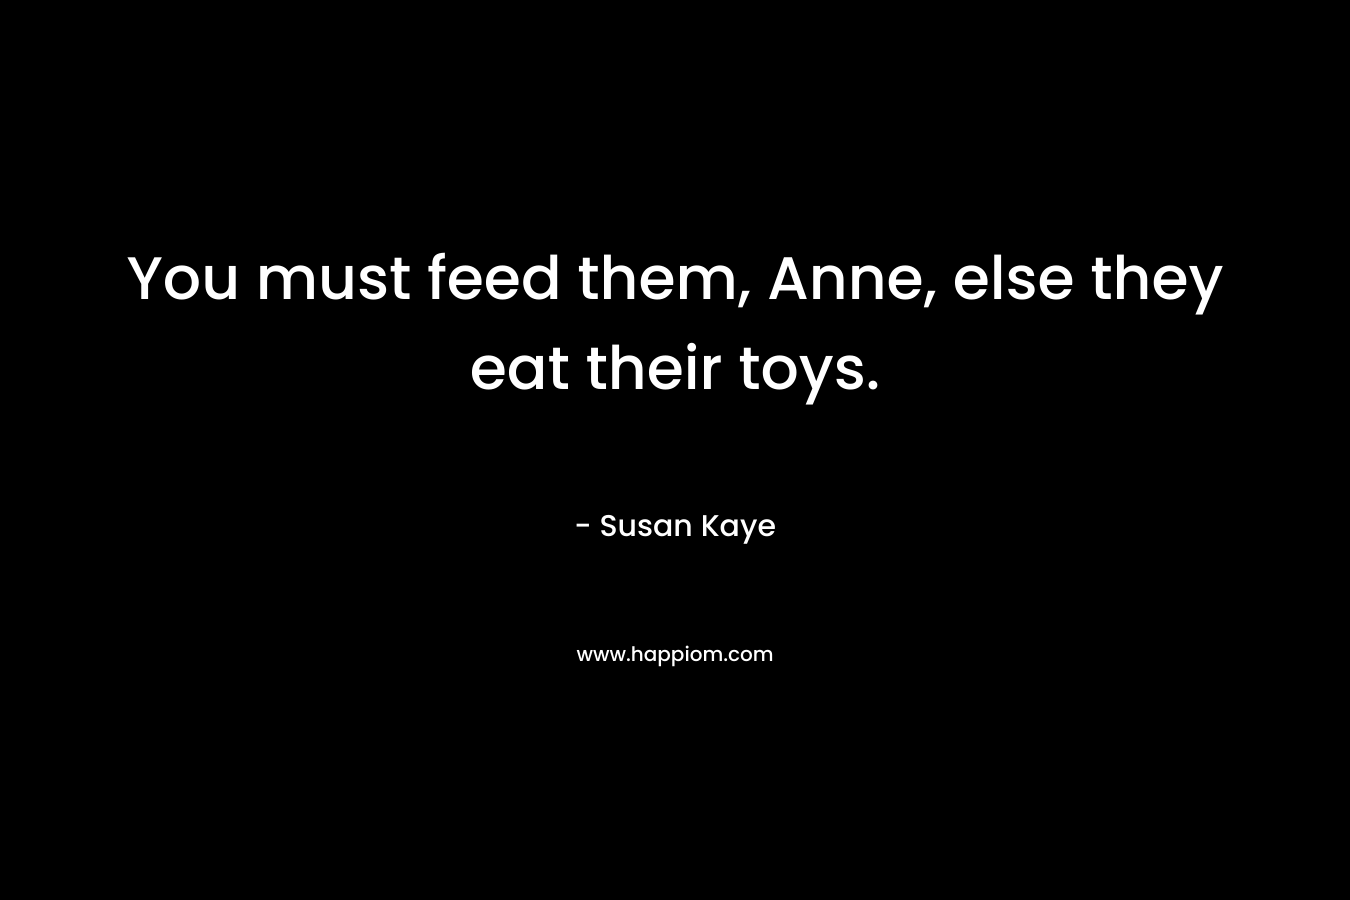 You must feed them, Anne, else they eat their toys.